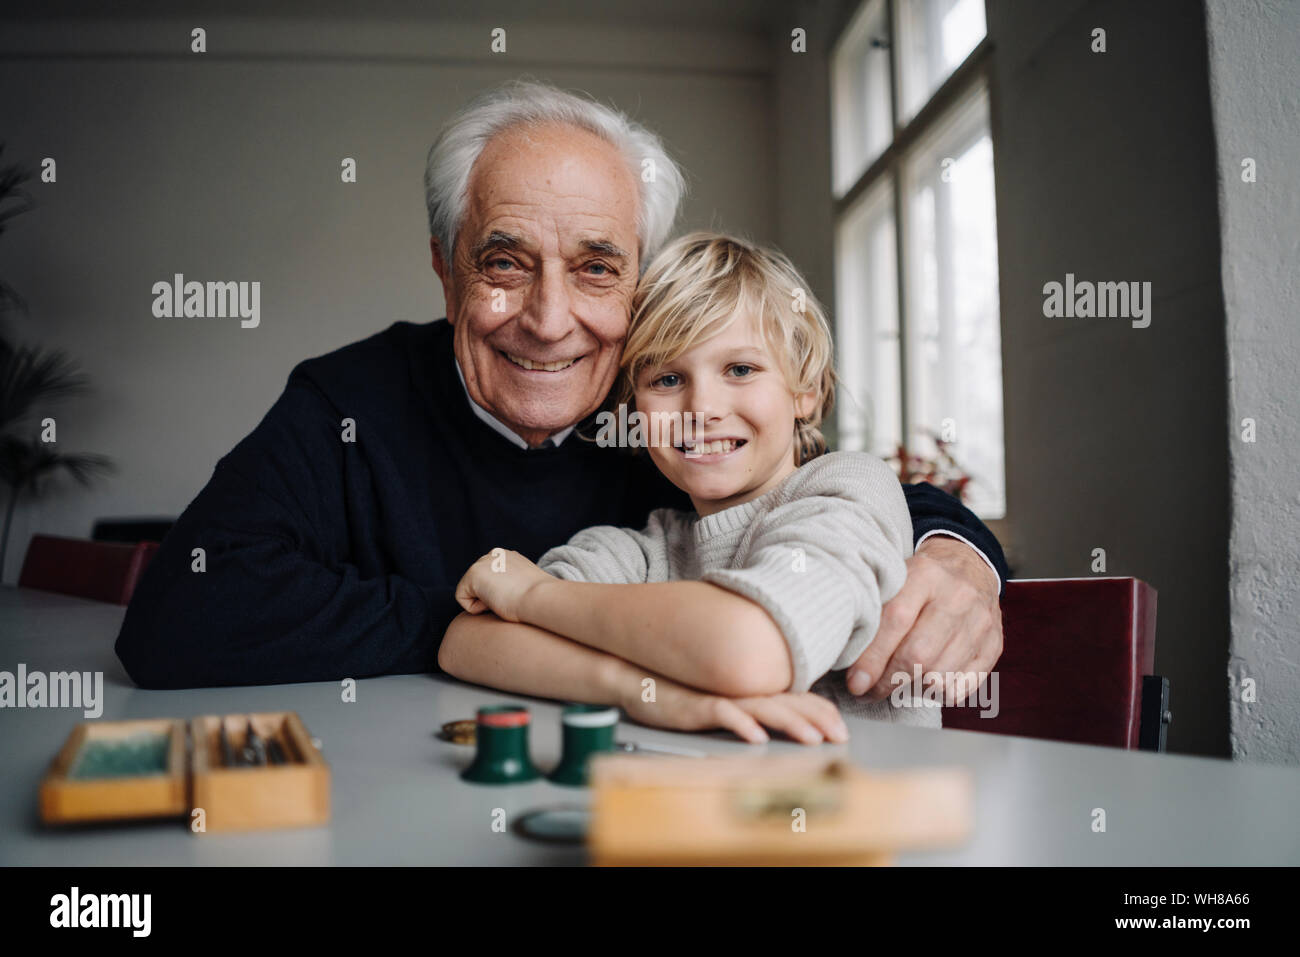 Portrait of happy watchmaker and his grandson sitting at table Stock Photo